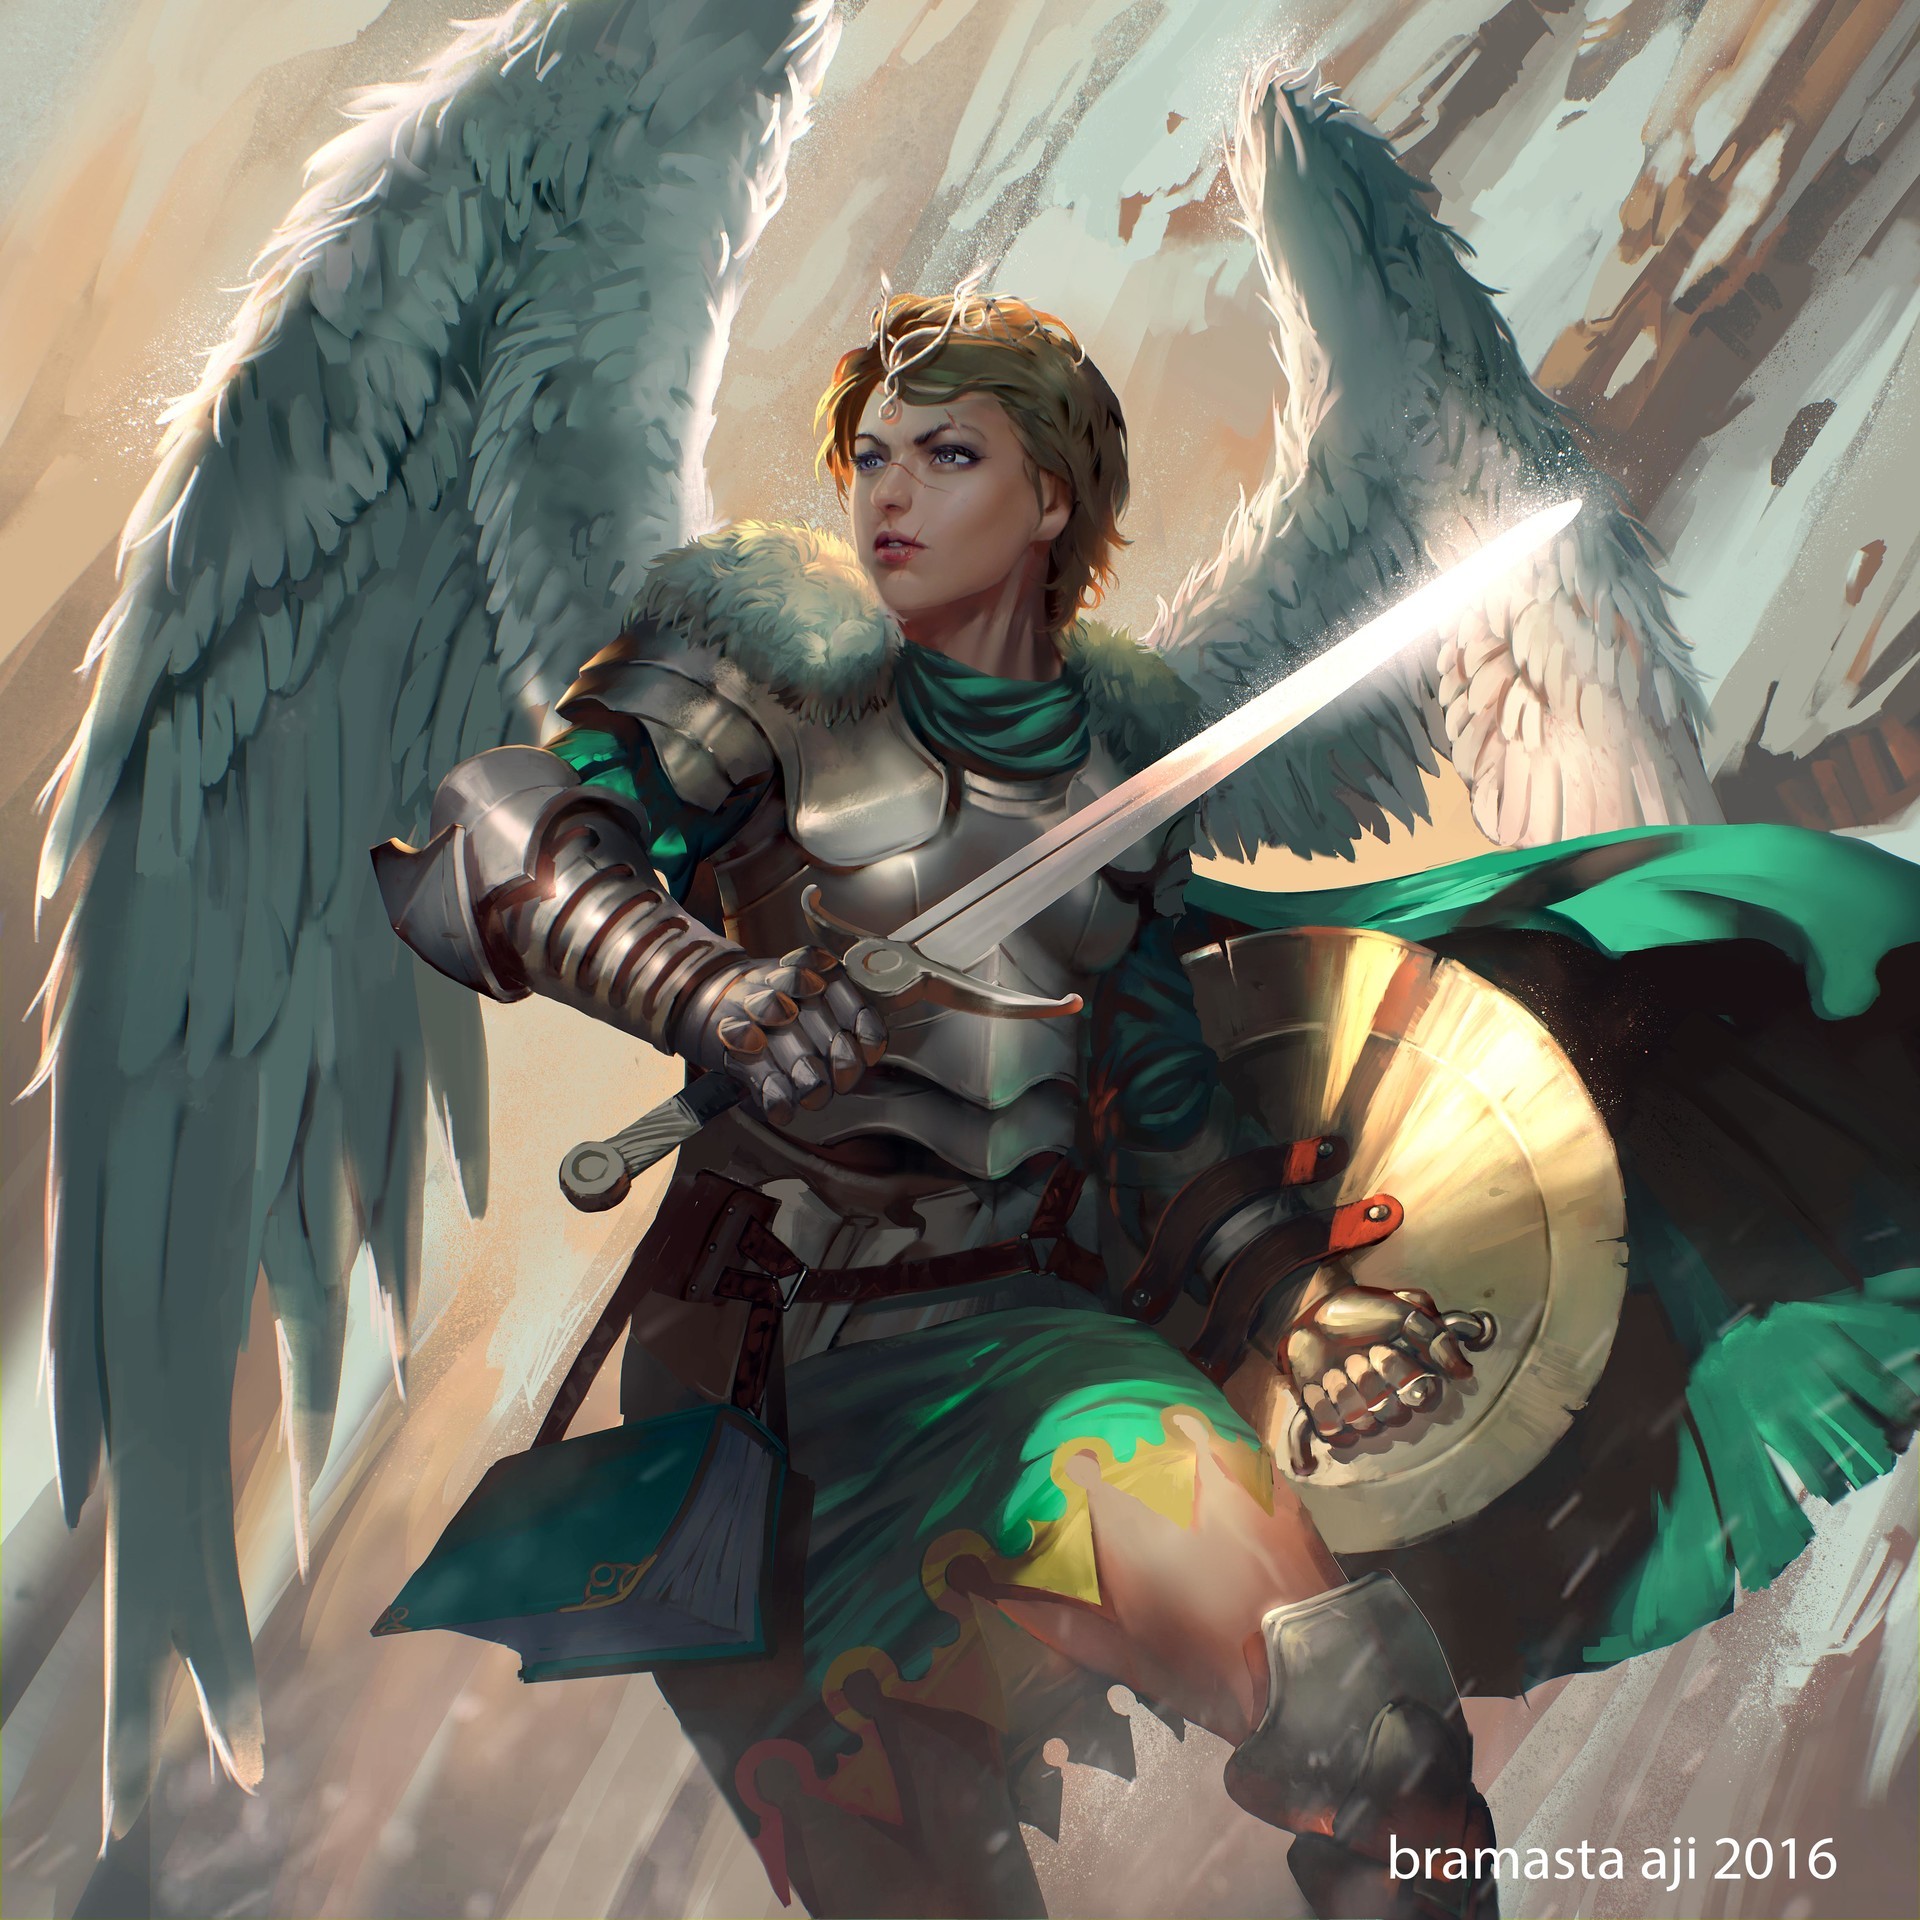 General 1920x1920 fantasy art warrior angel fantasy girl armor armored fantasy armor sword shield watermarked 2016 (Year) wings women with swords women with weapons women